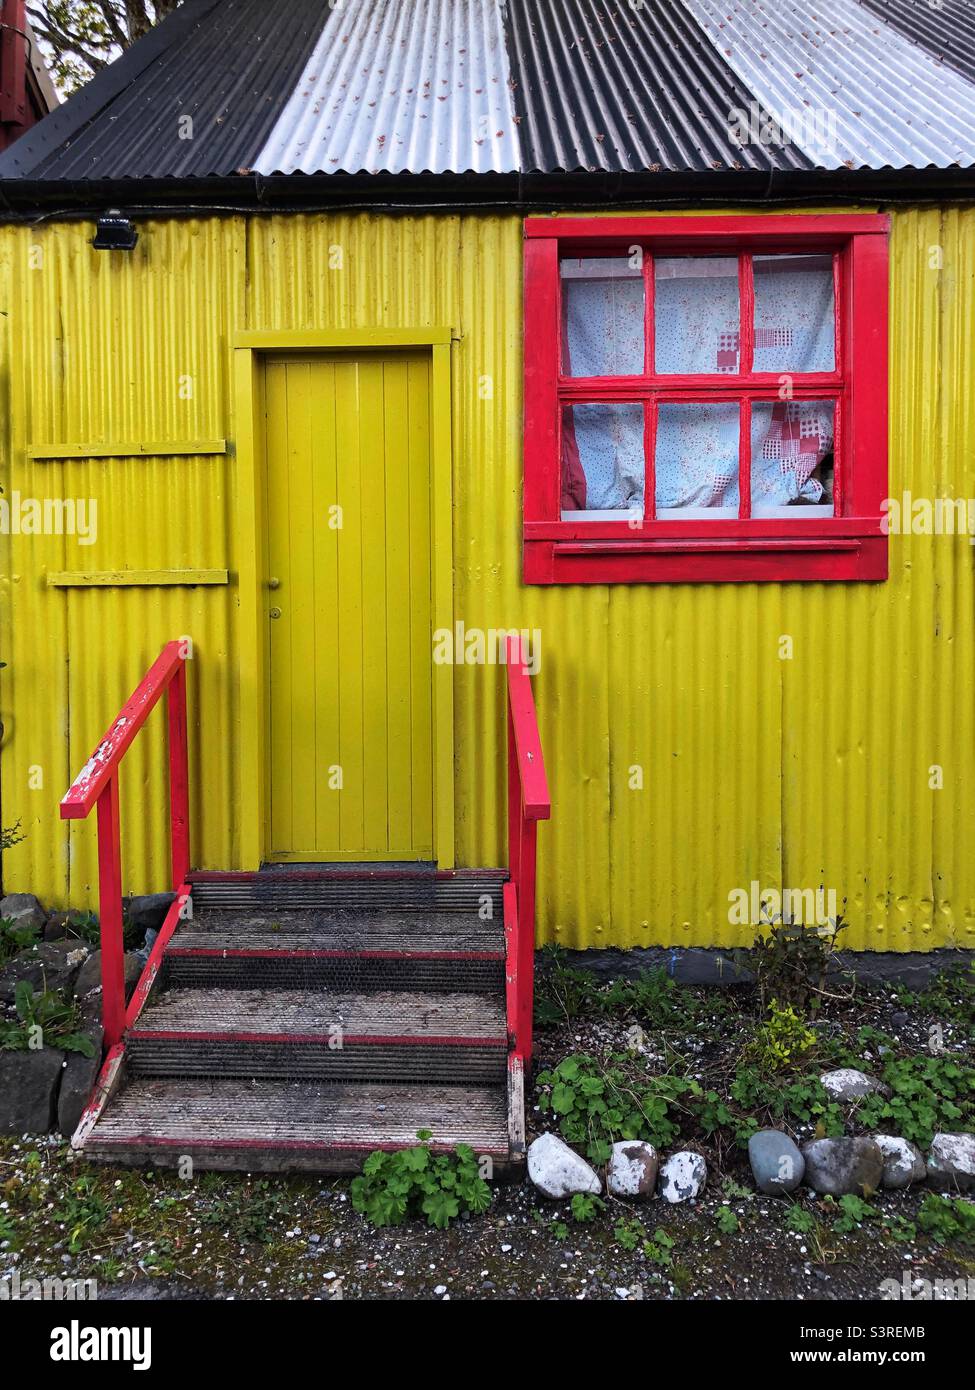 https://c8.alamy.com/comp/S3REMB/red-window-on-yellow-corrugated-out-building-S3REMB.jpg